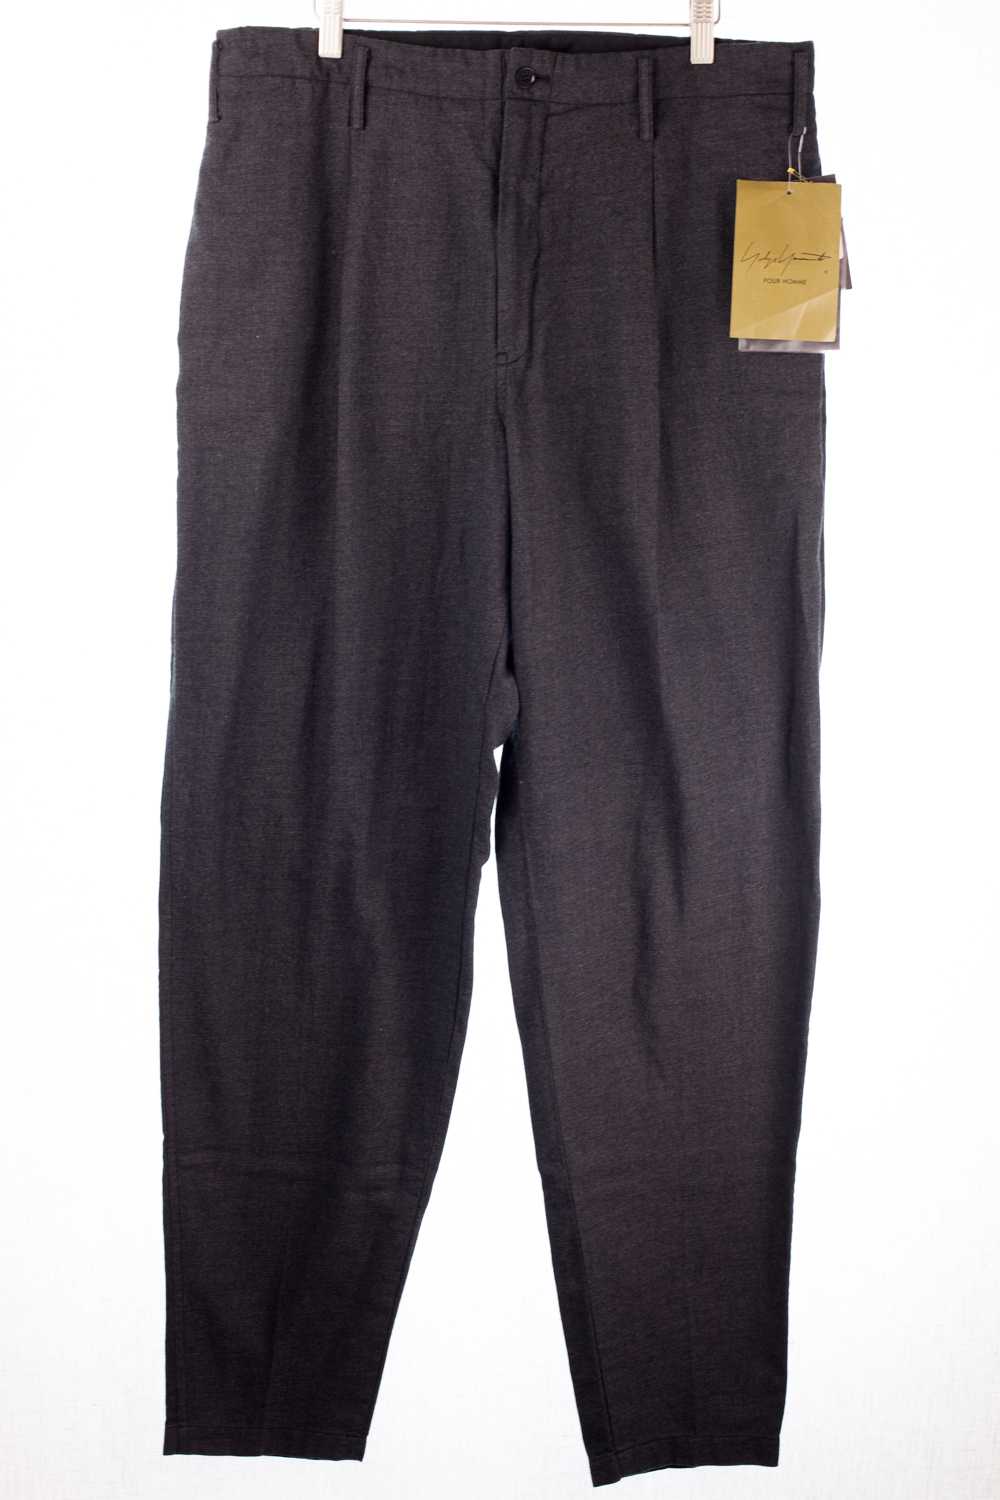 FW15 Balloon Pleated Trousers - image 1